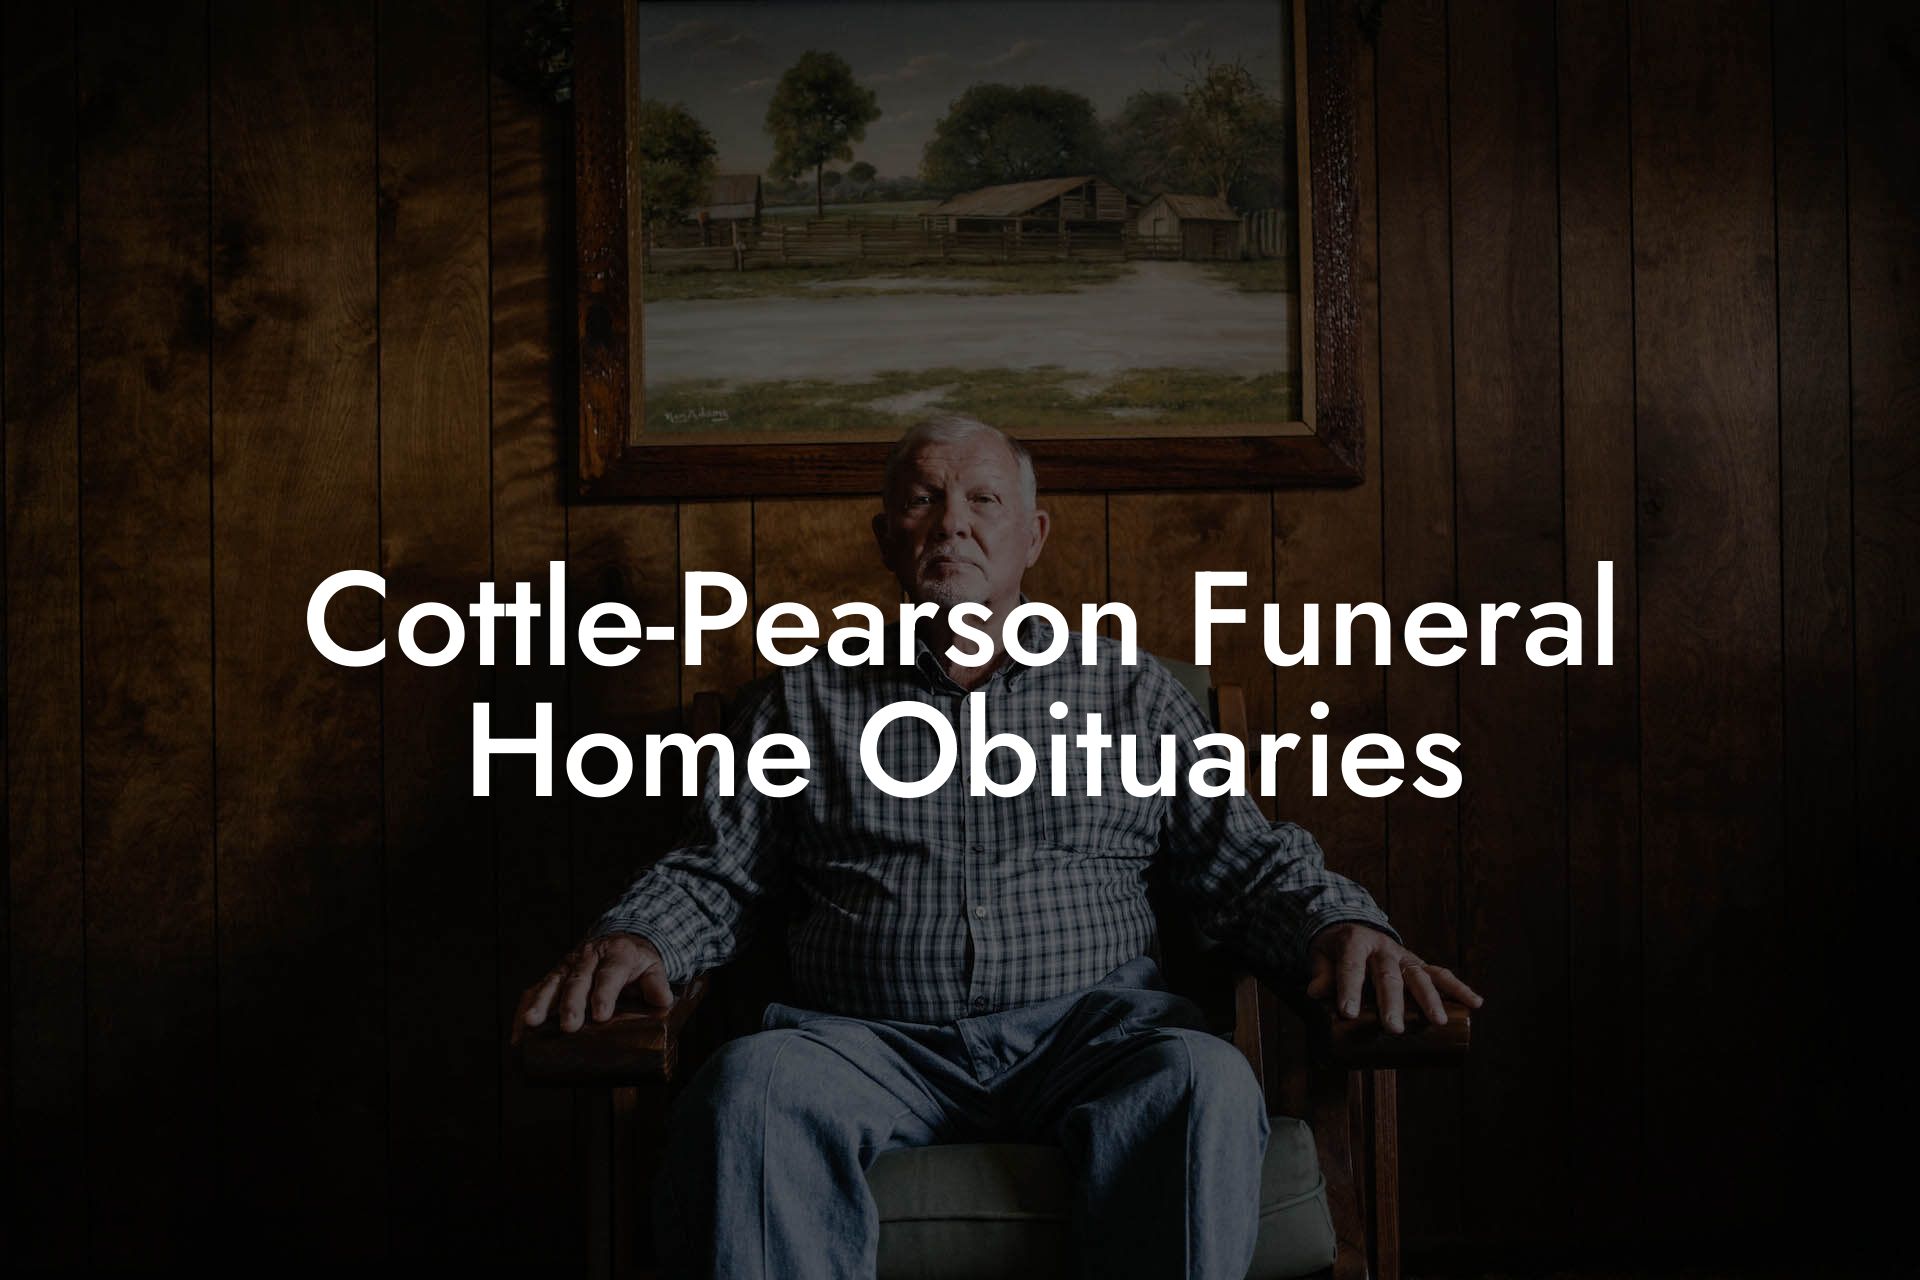 Cottle-Pearson Funeral Home Obituaries